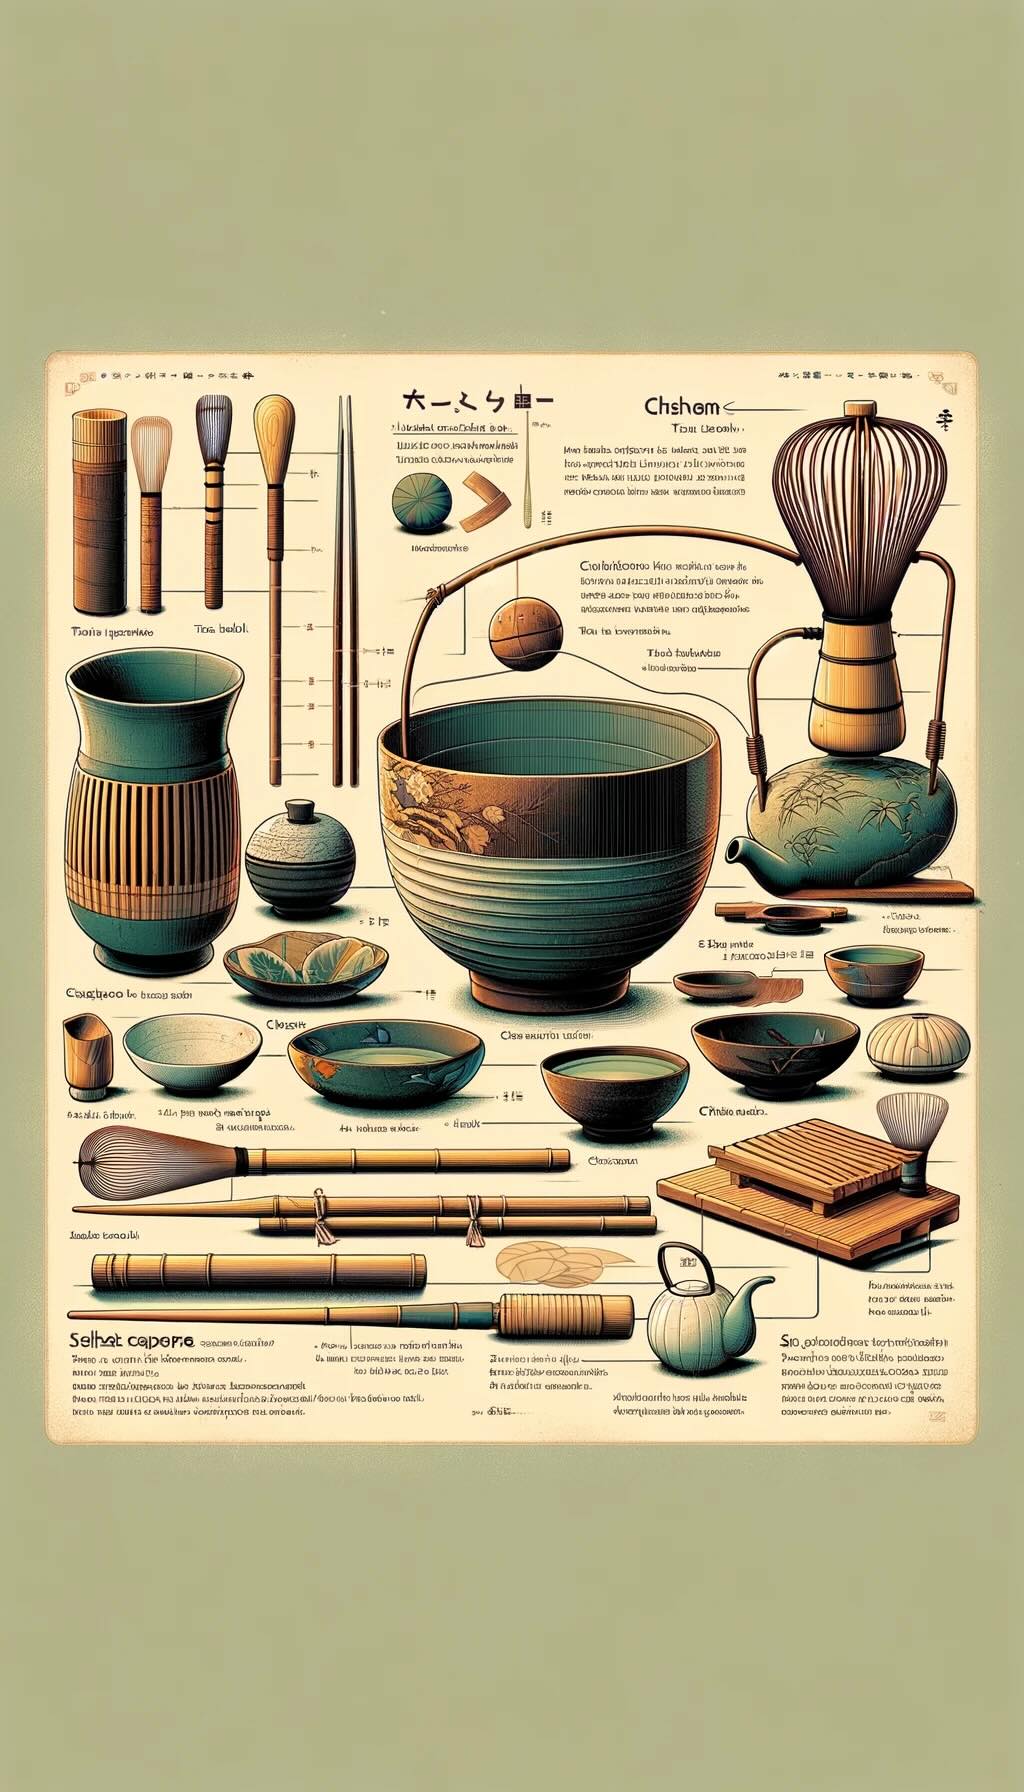 Utensils and Equipment For Serving Tea In Japan Infographic 